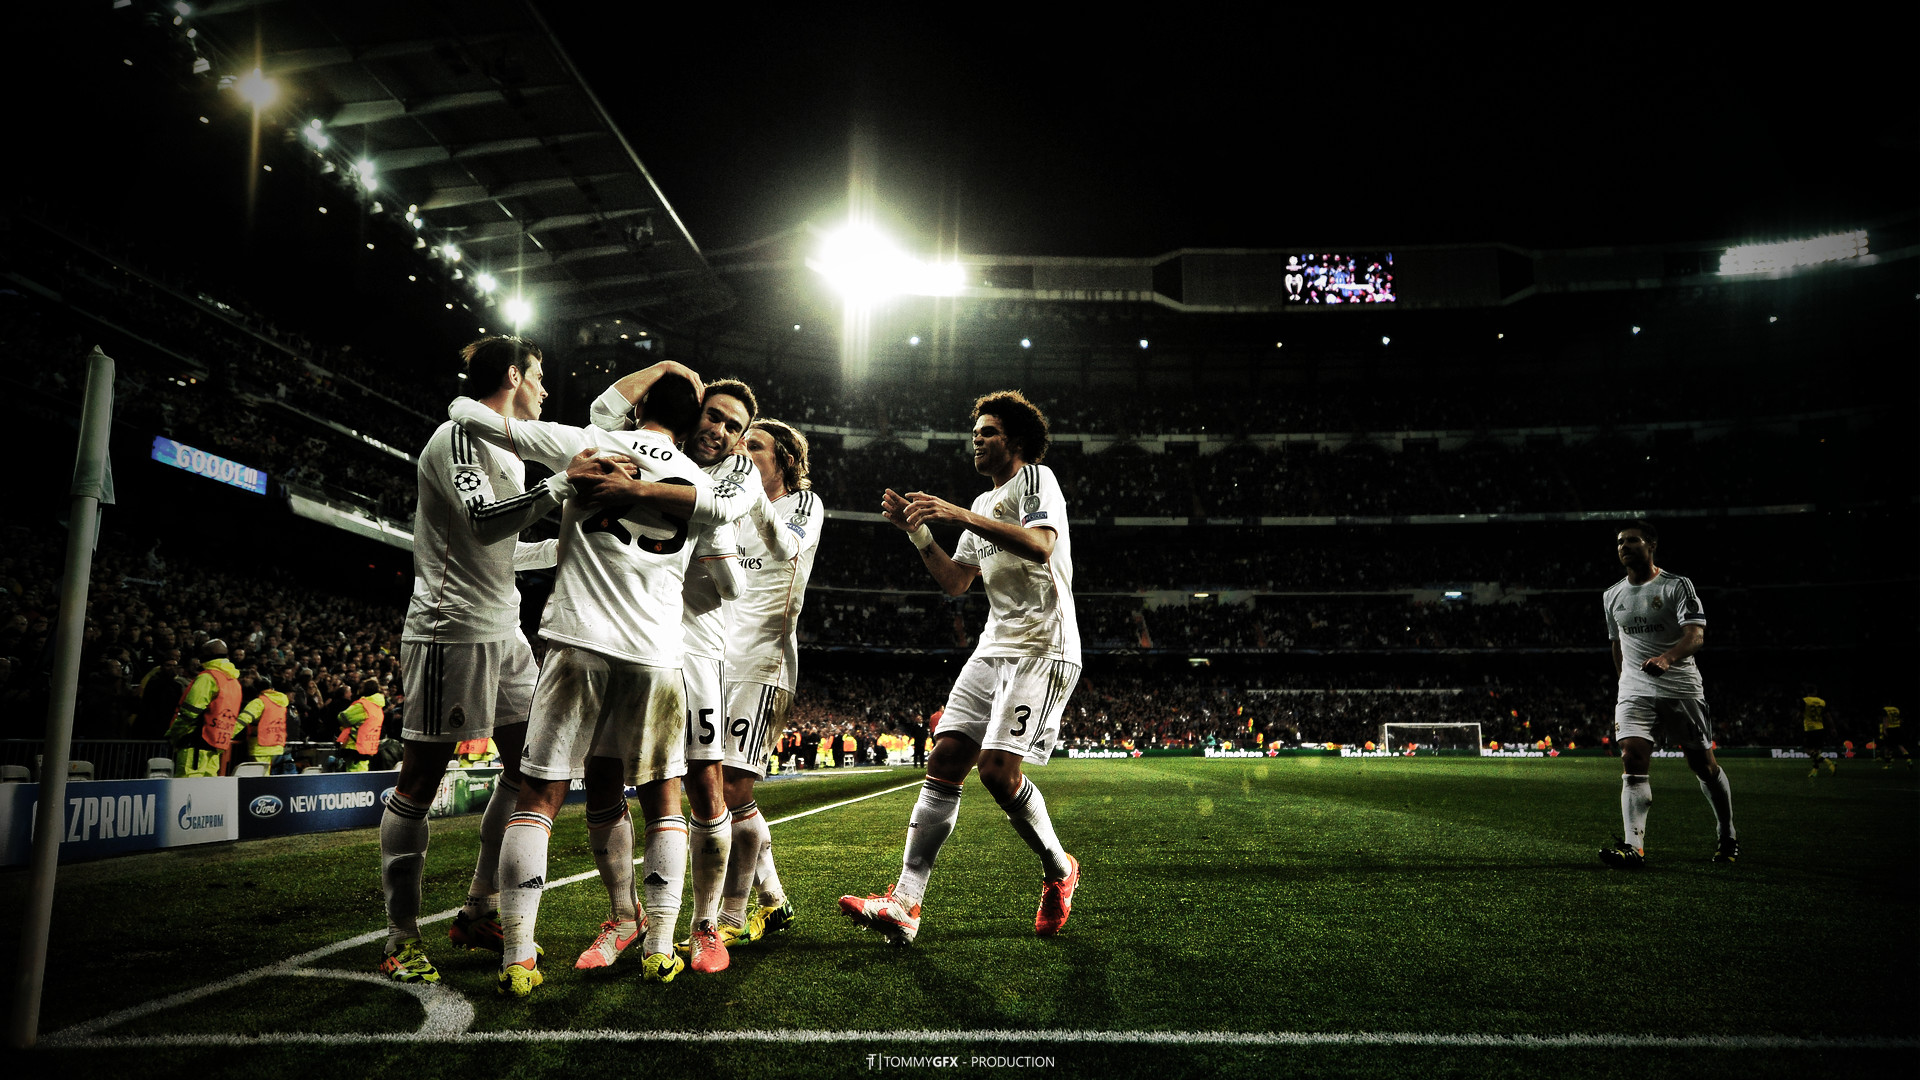 1920x1080 Real Madrid C.F. “We're all white” Wallpaper, you like it?